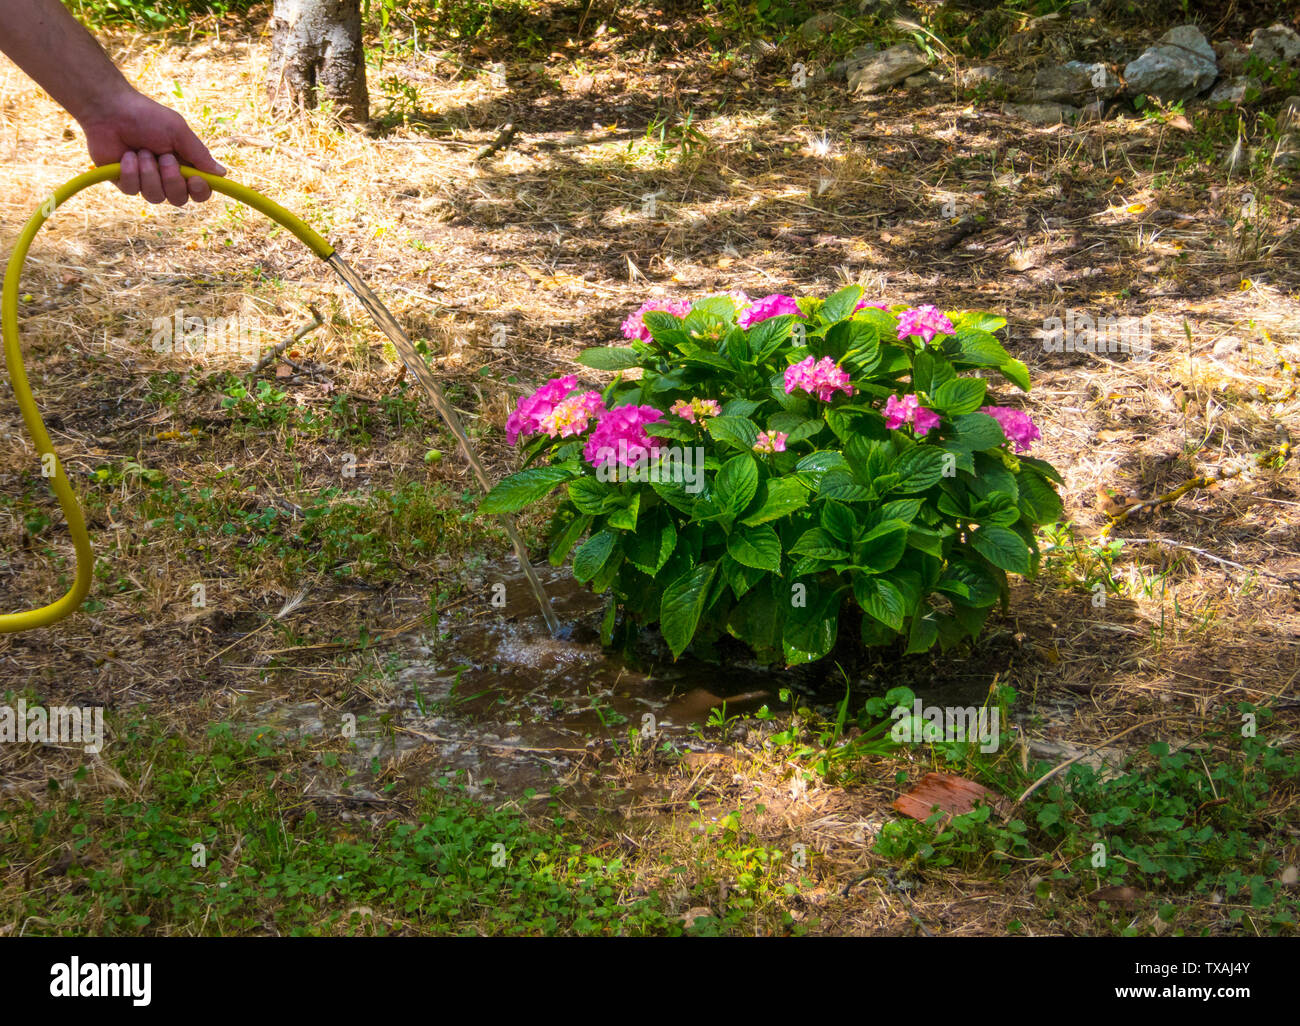 Hand watering an hydrangea plant in a garden with yellow pipe Stock Photo